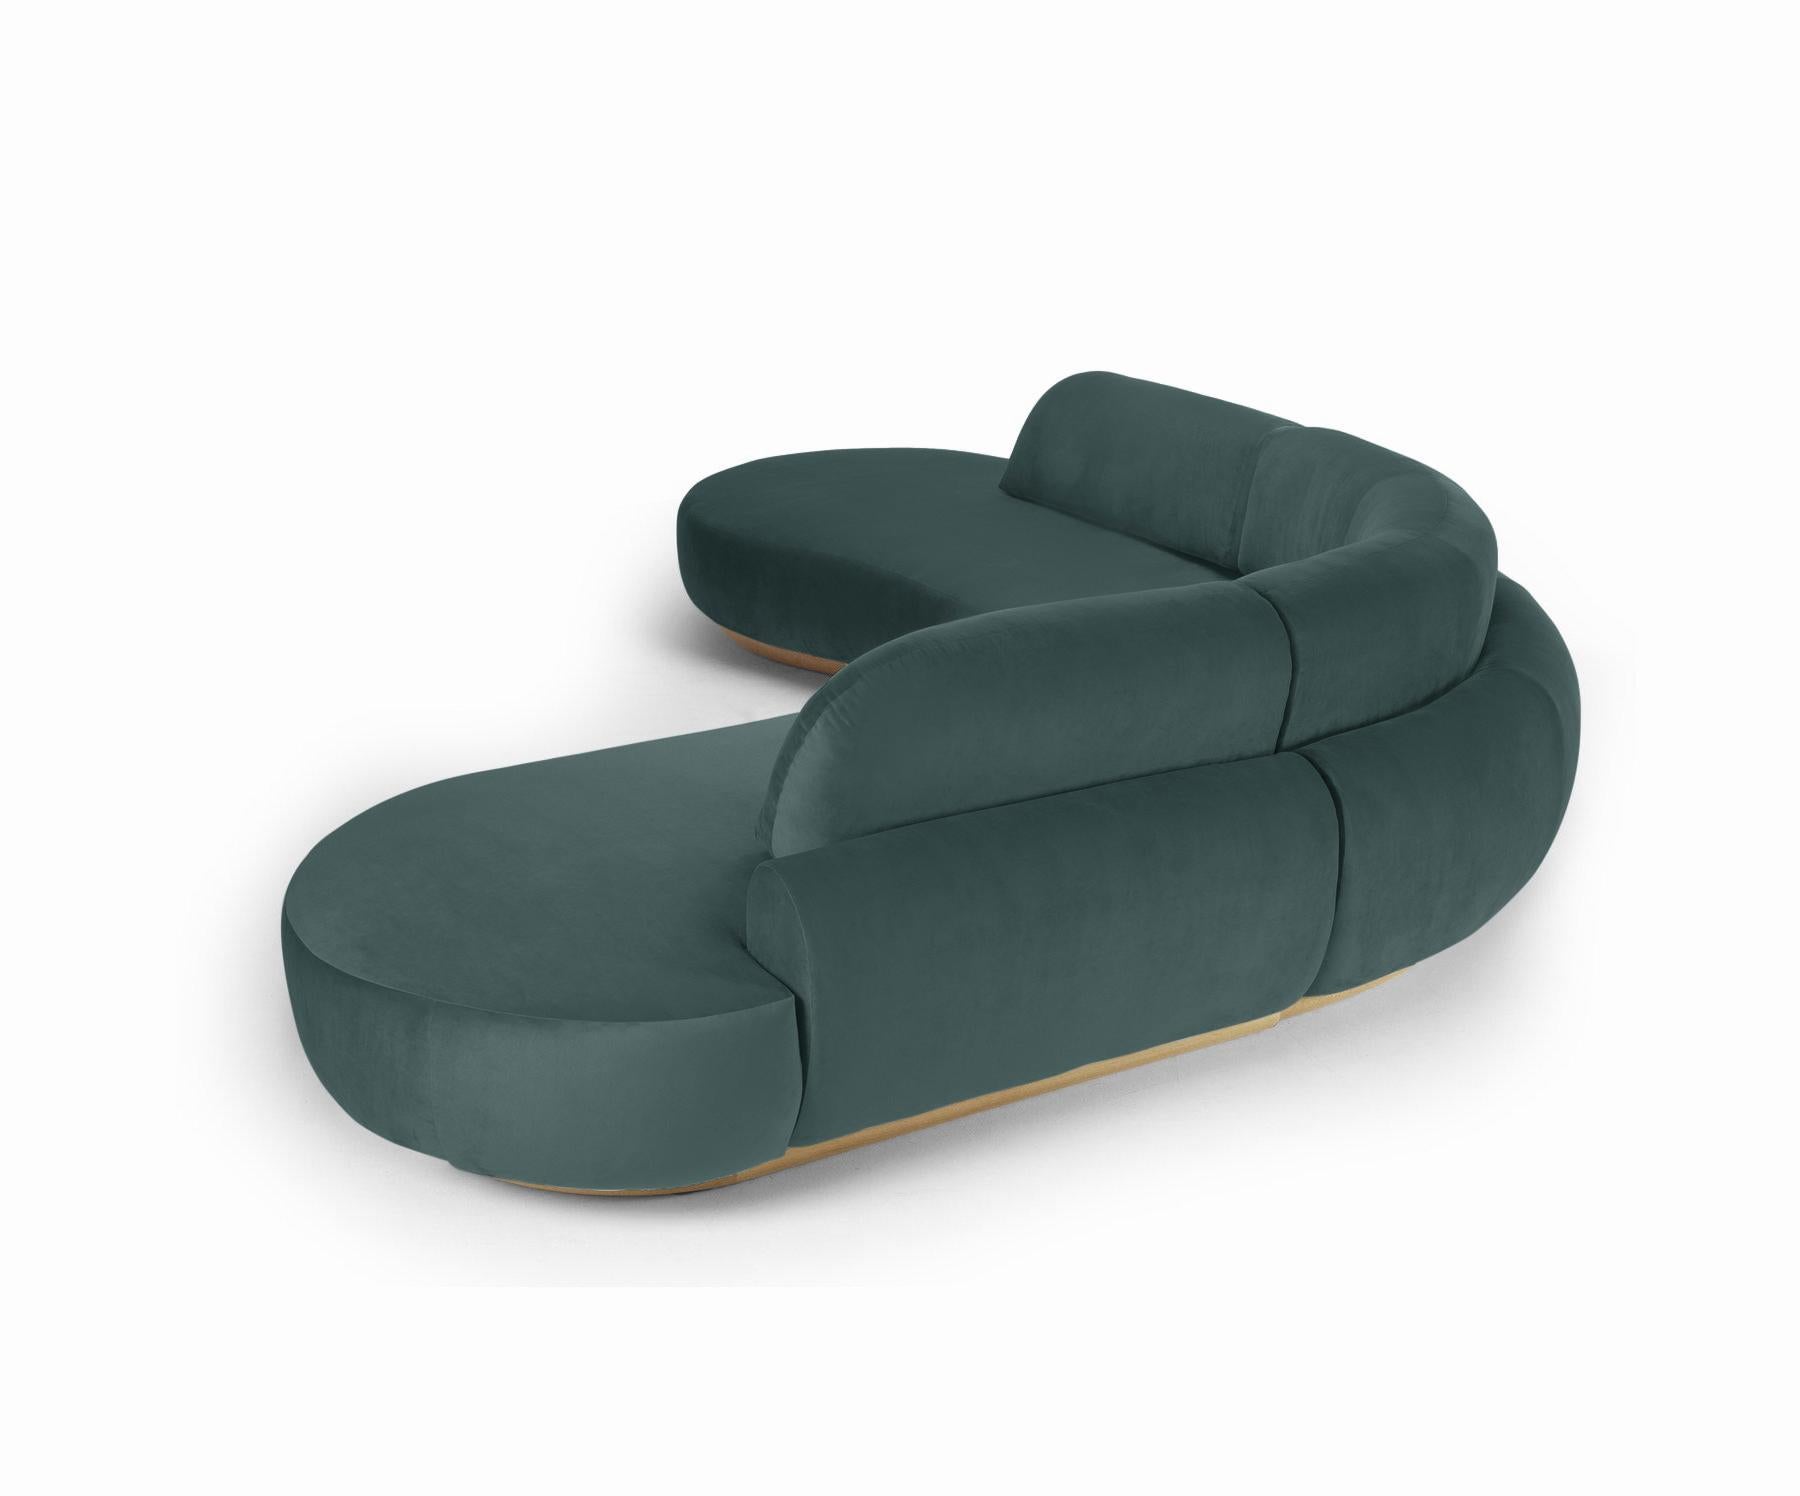 Portuguese Naked Curved Sectional Sofa, 3 Piece with Natural Oak and Teal For Sale